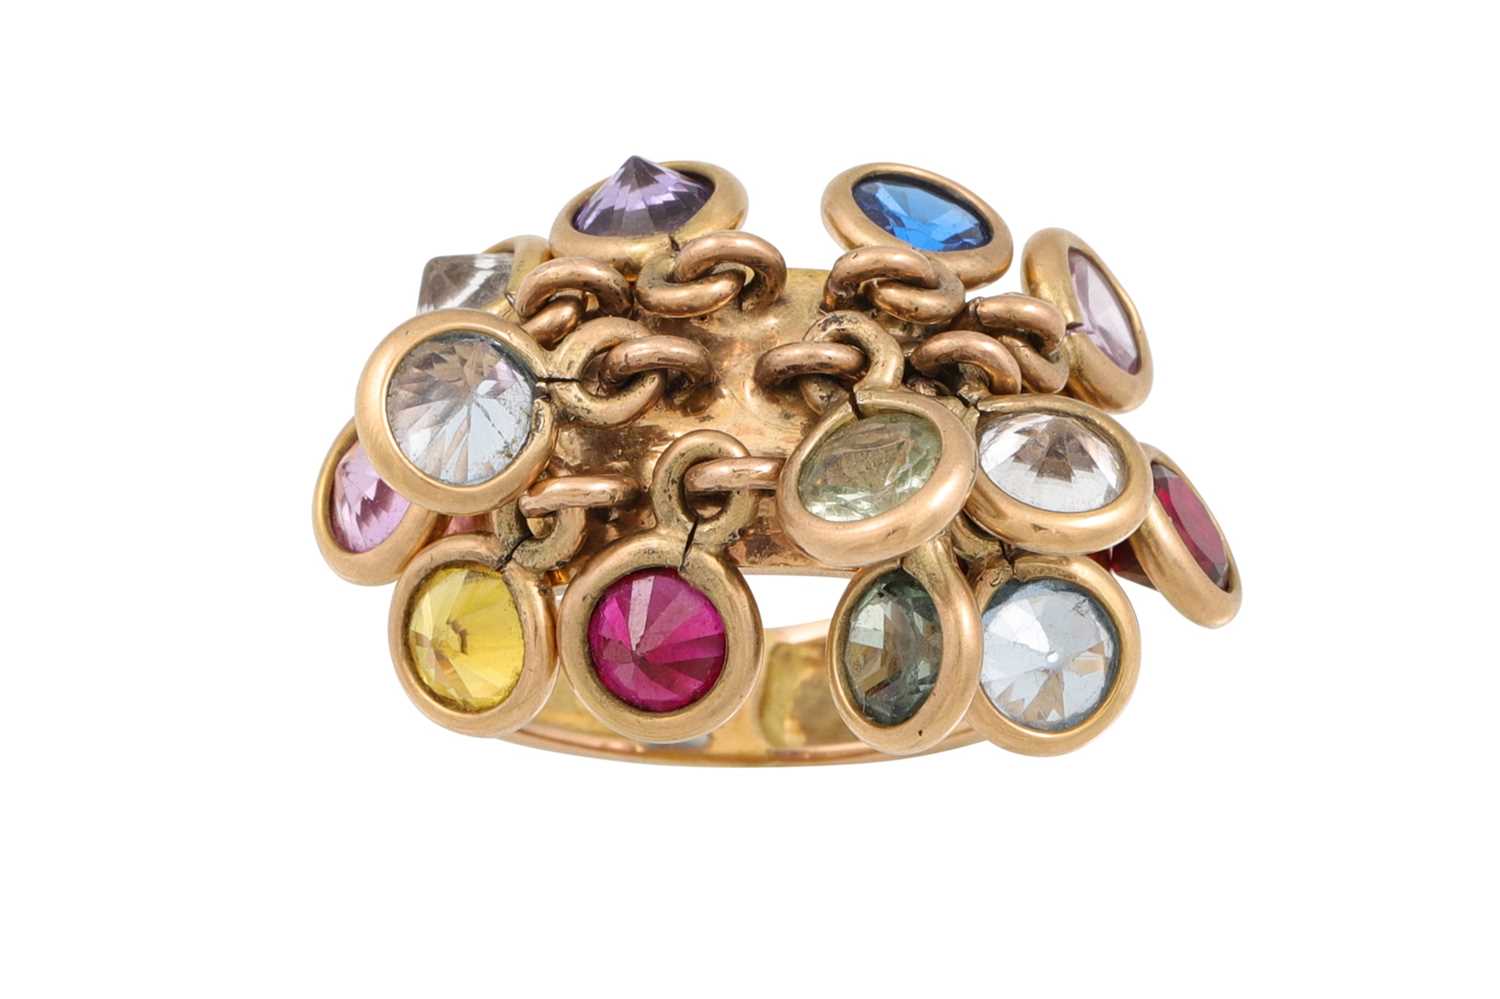 Lot 111 - A GOLD RING, suspending multiple charms